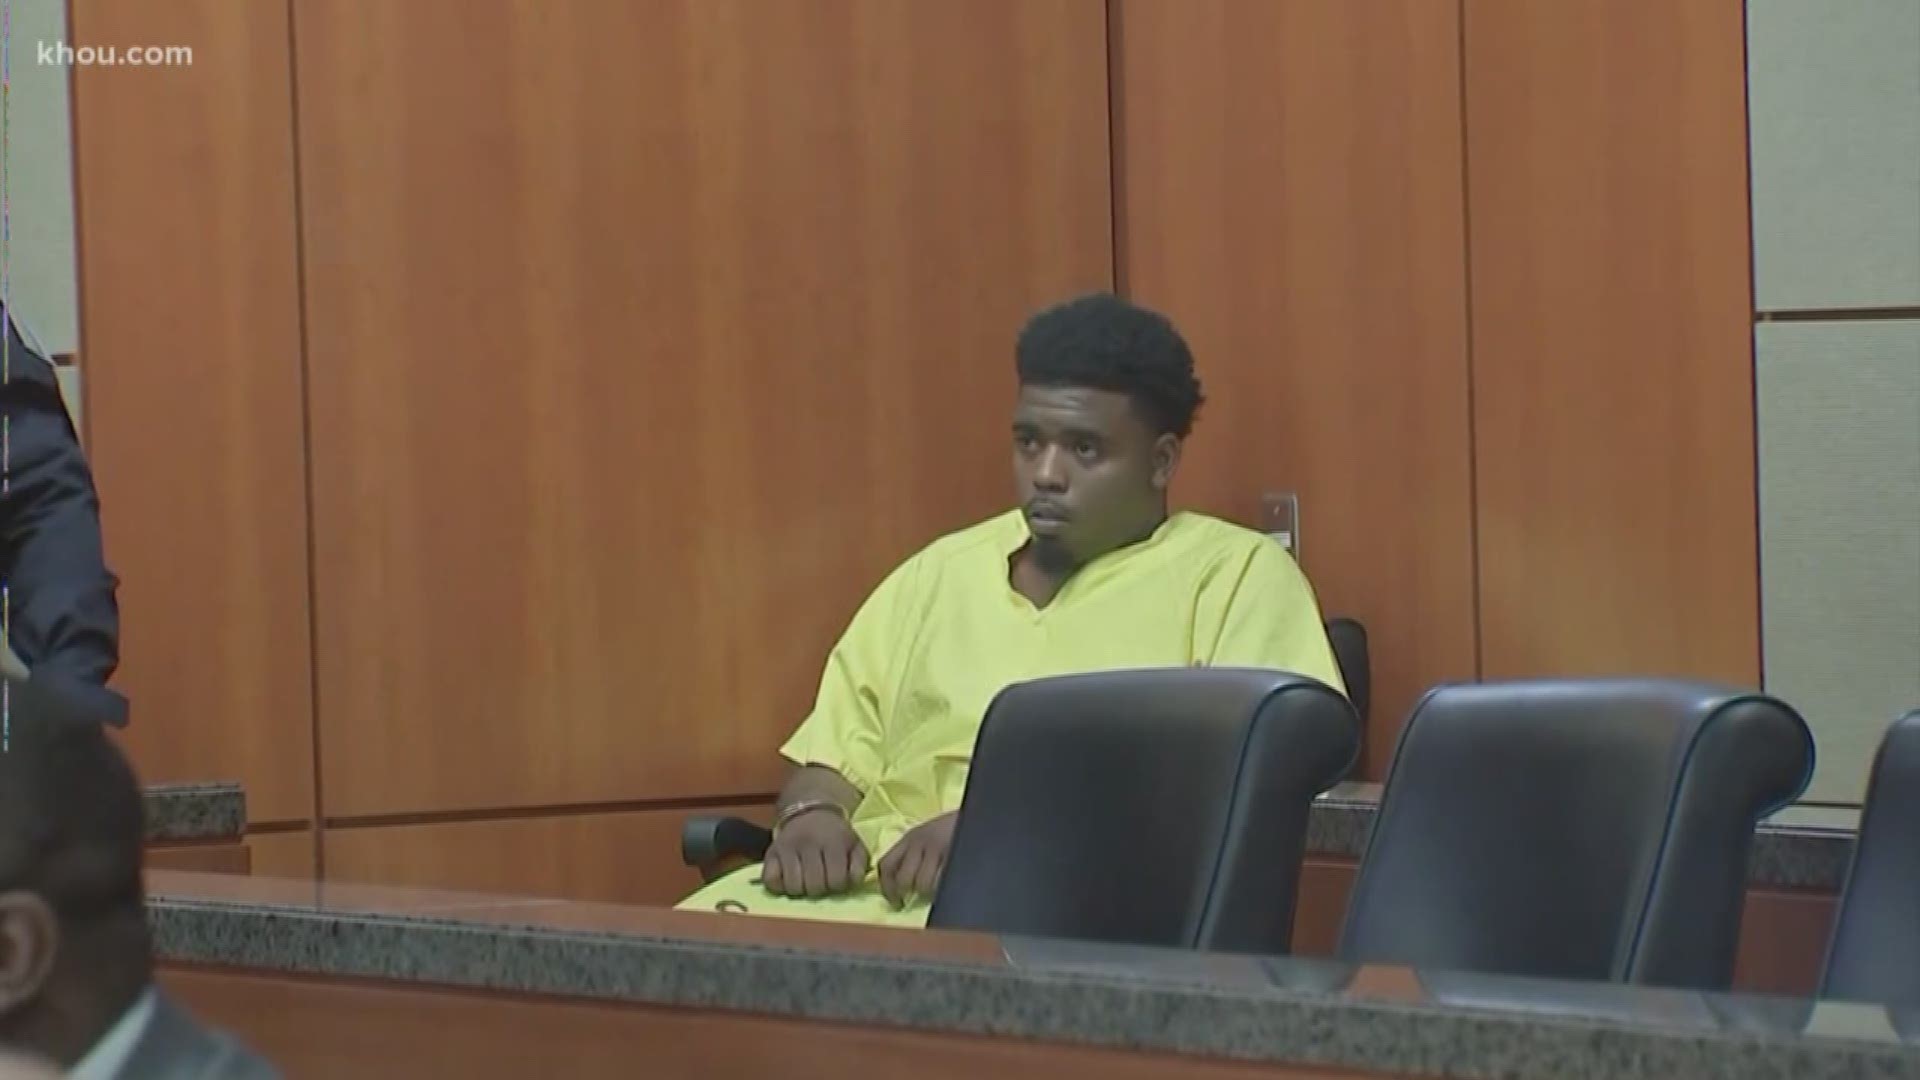 One of the suspects in the shooting death of 7-year-old Jazmine Barnes appeared in court Monday morning.